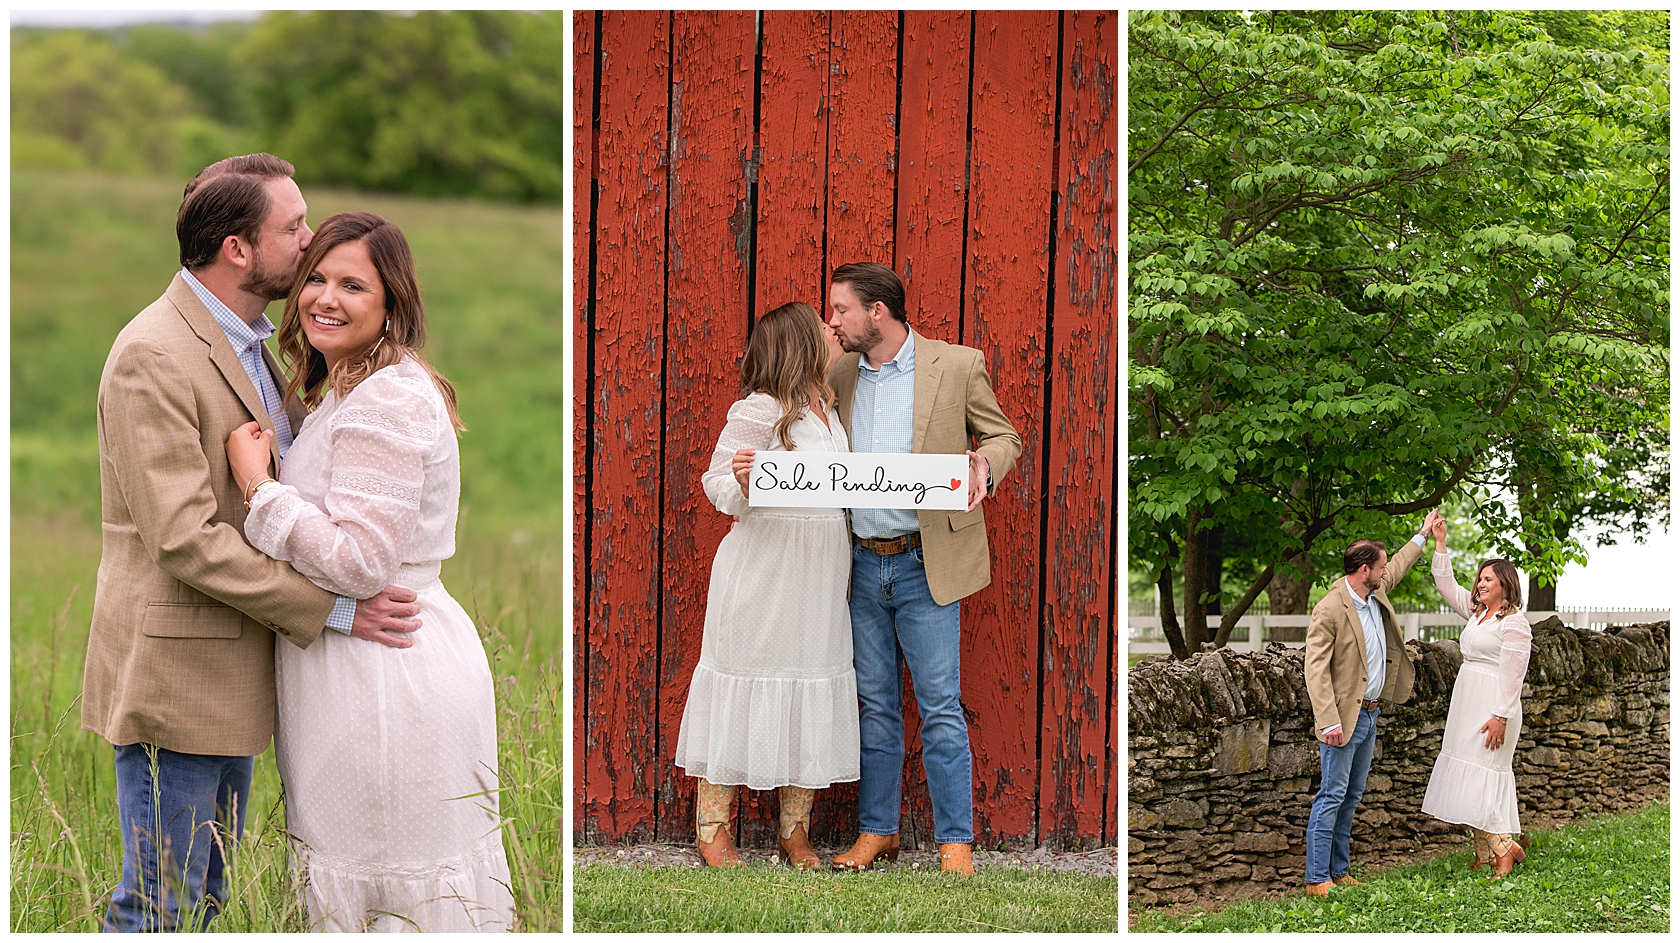 Kentucky Wedding Photographers at a Spring Engagement Session at Shaker Village in Harrodsburg Kentucky by Kevin and Anna Photography